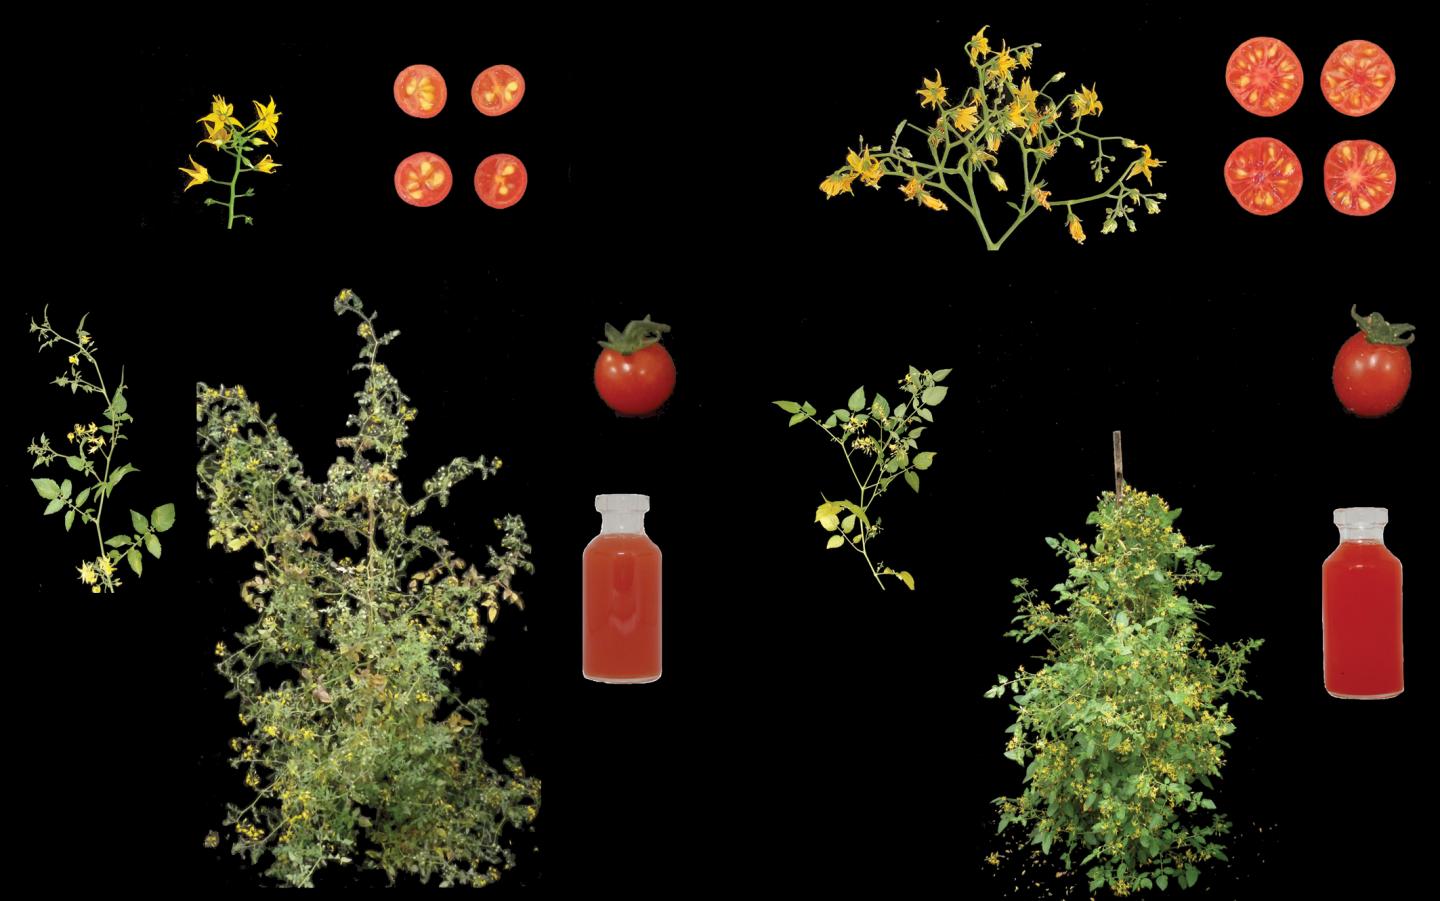 New Cultivated Tomato and Wild Plant